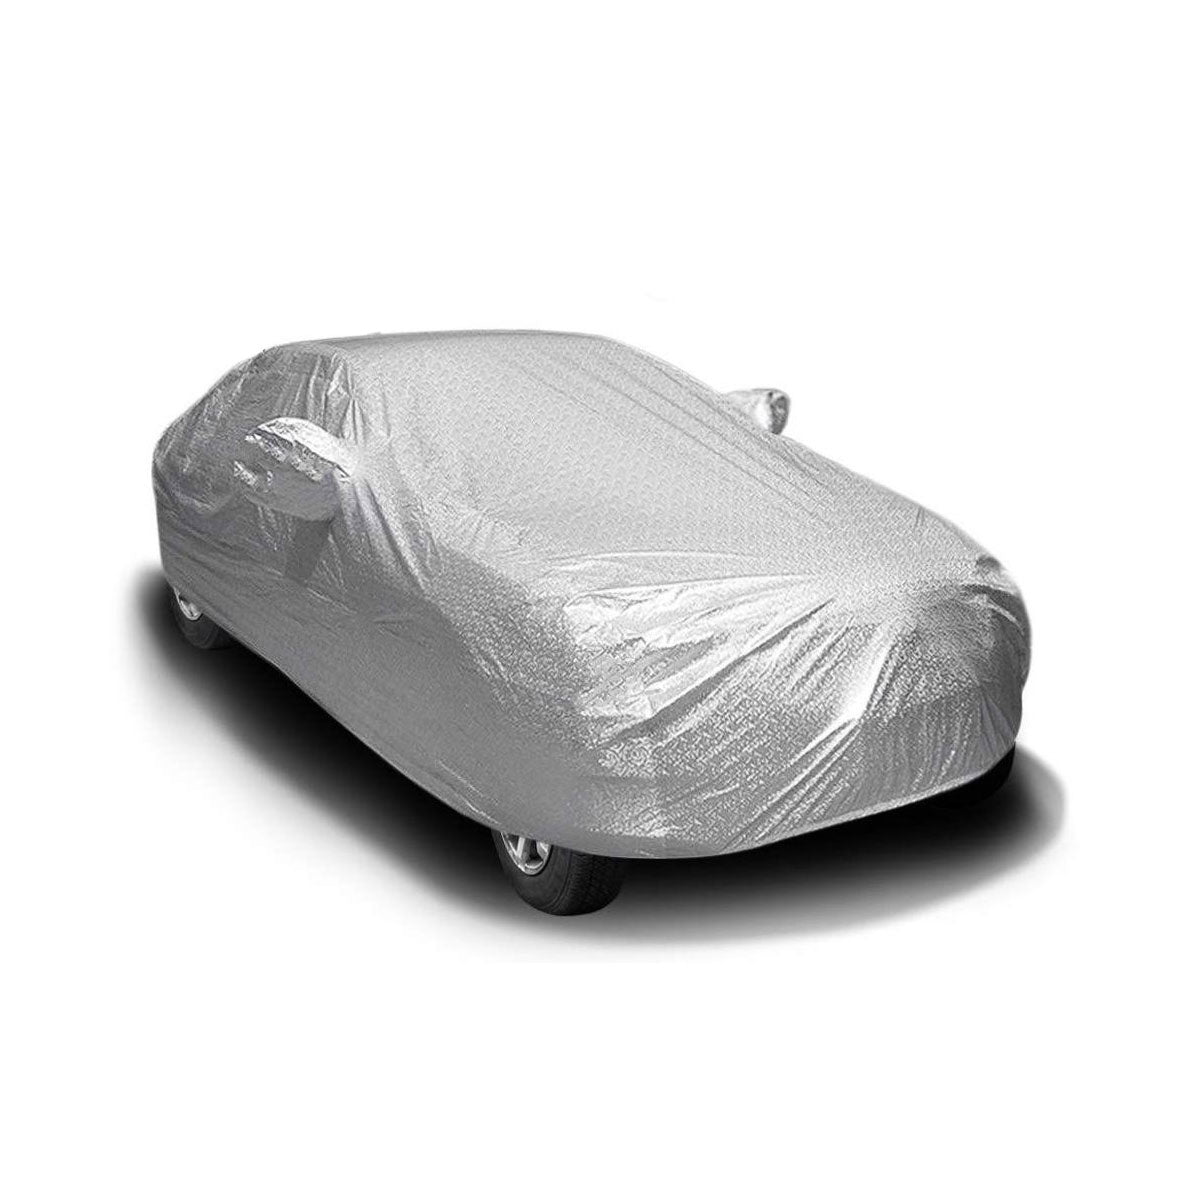 Oshotto Spyro Silver Anti Reflective, dustproof and Water Proof Car Body Cover with Mirror Pockets For KIA Sonet